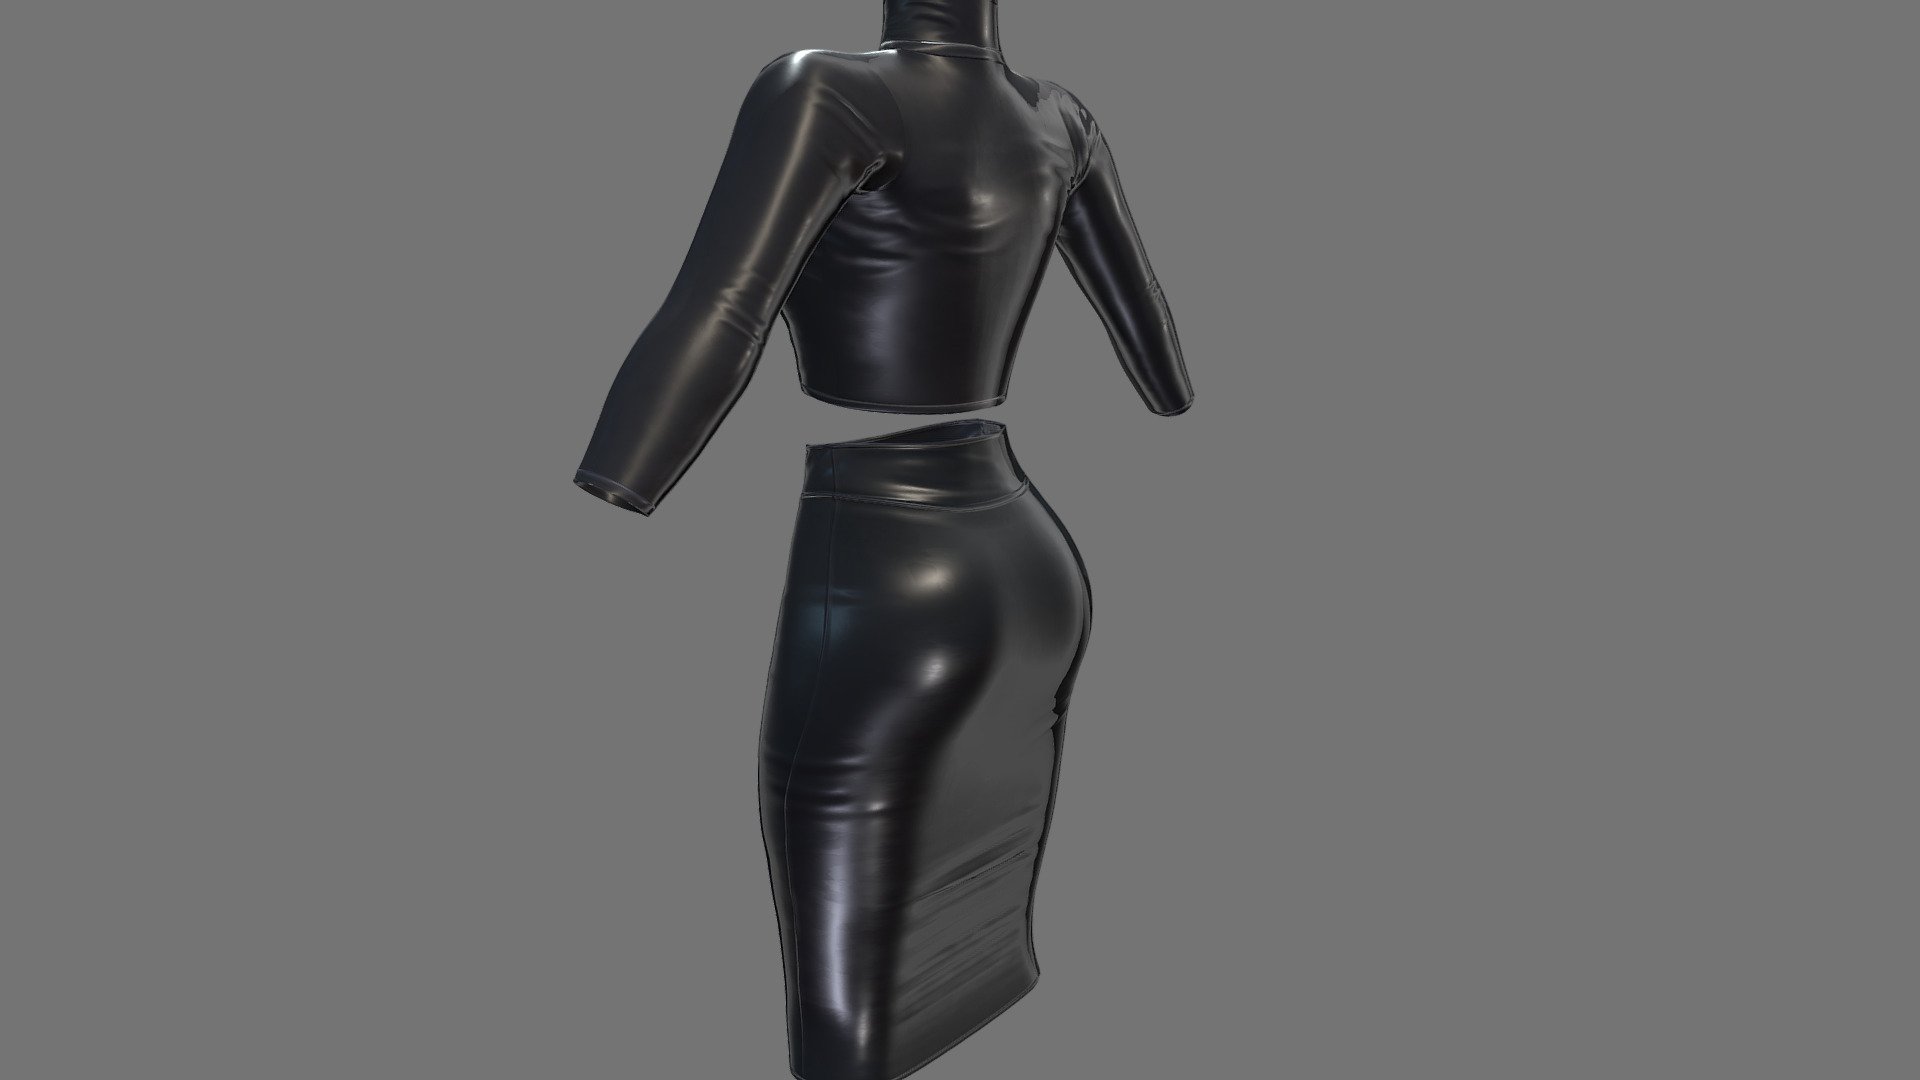 Top + Skirt (Seperate models)

Can be fitted to any character

Ready for games

Clean topology

Unwrapped UVs

High quality realistic textues

FBX, OBJ, gITF, USDZ (request other formats)

PBR or Classic

Please ask for any other questions

Type     user:3dia &ldquo;search term